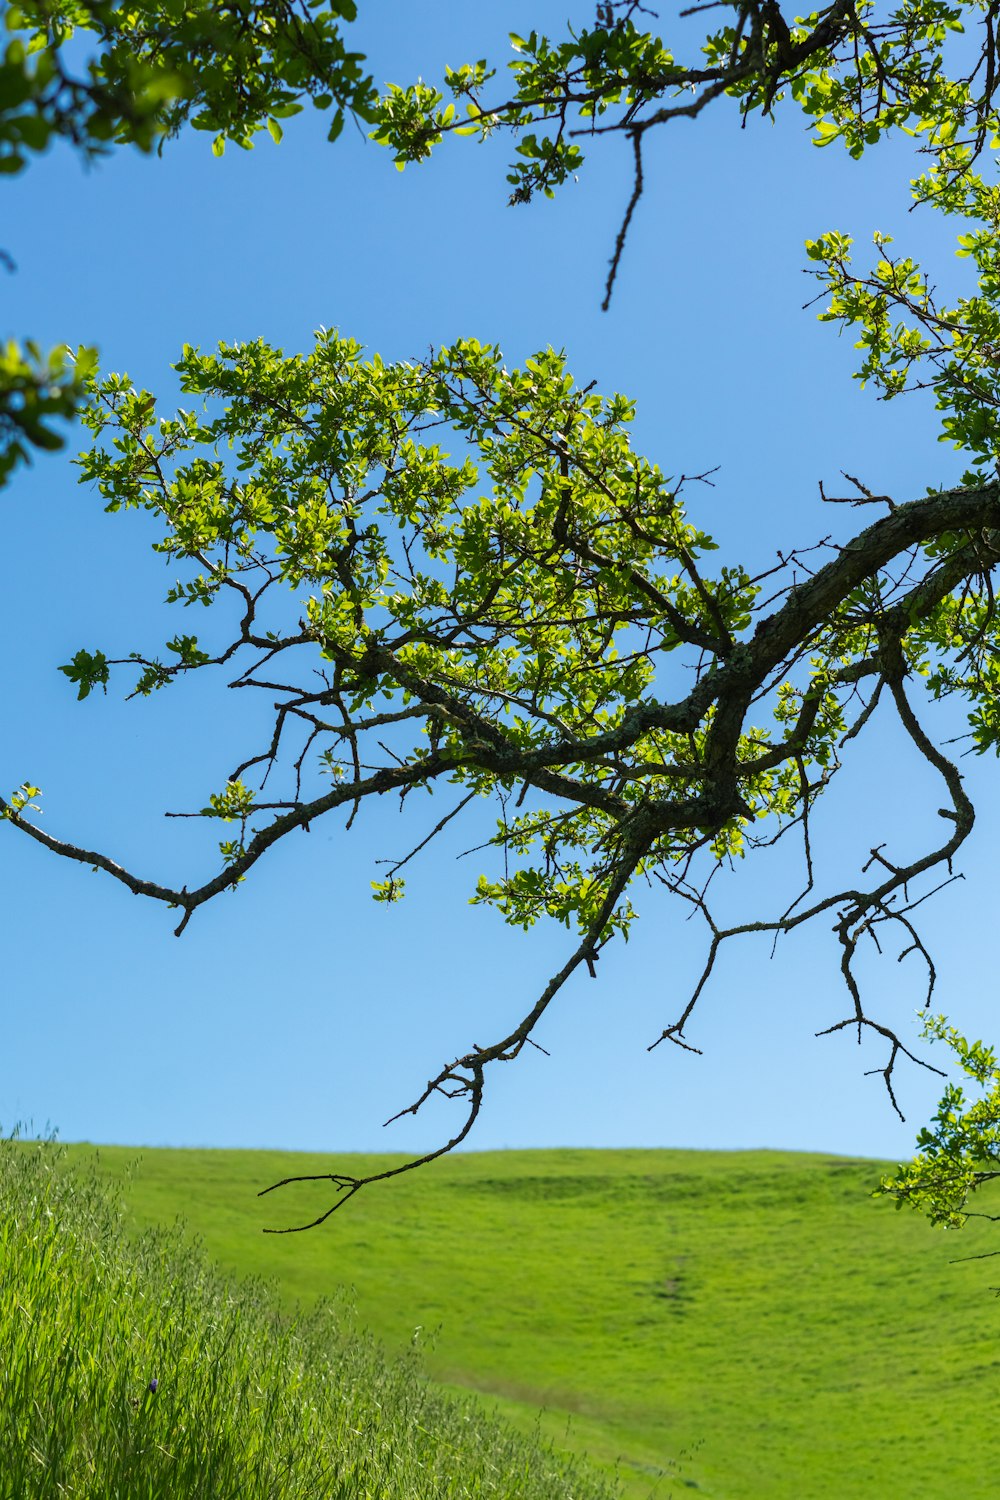 a tree branch in the middle of a grassy field